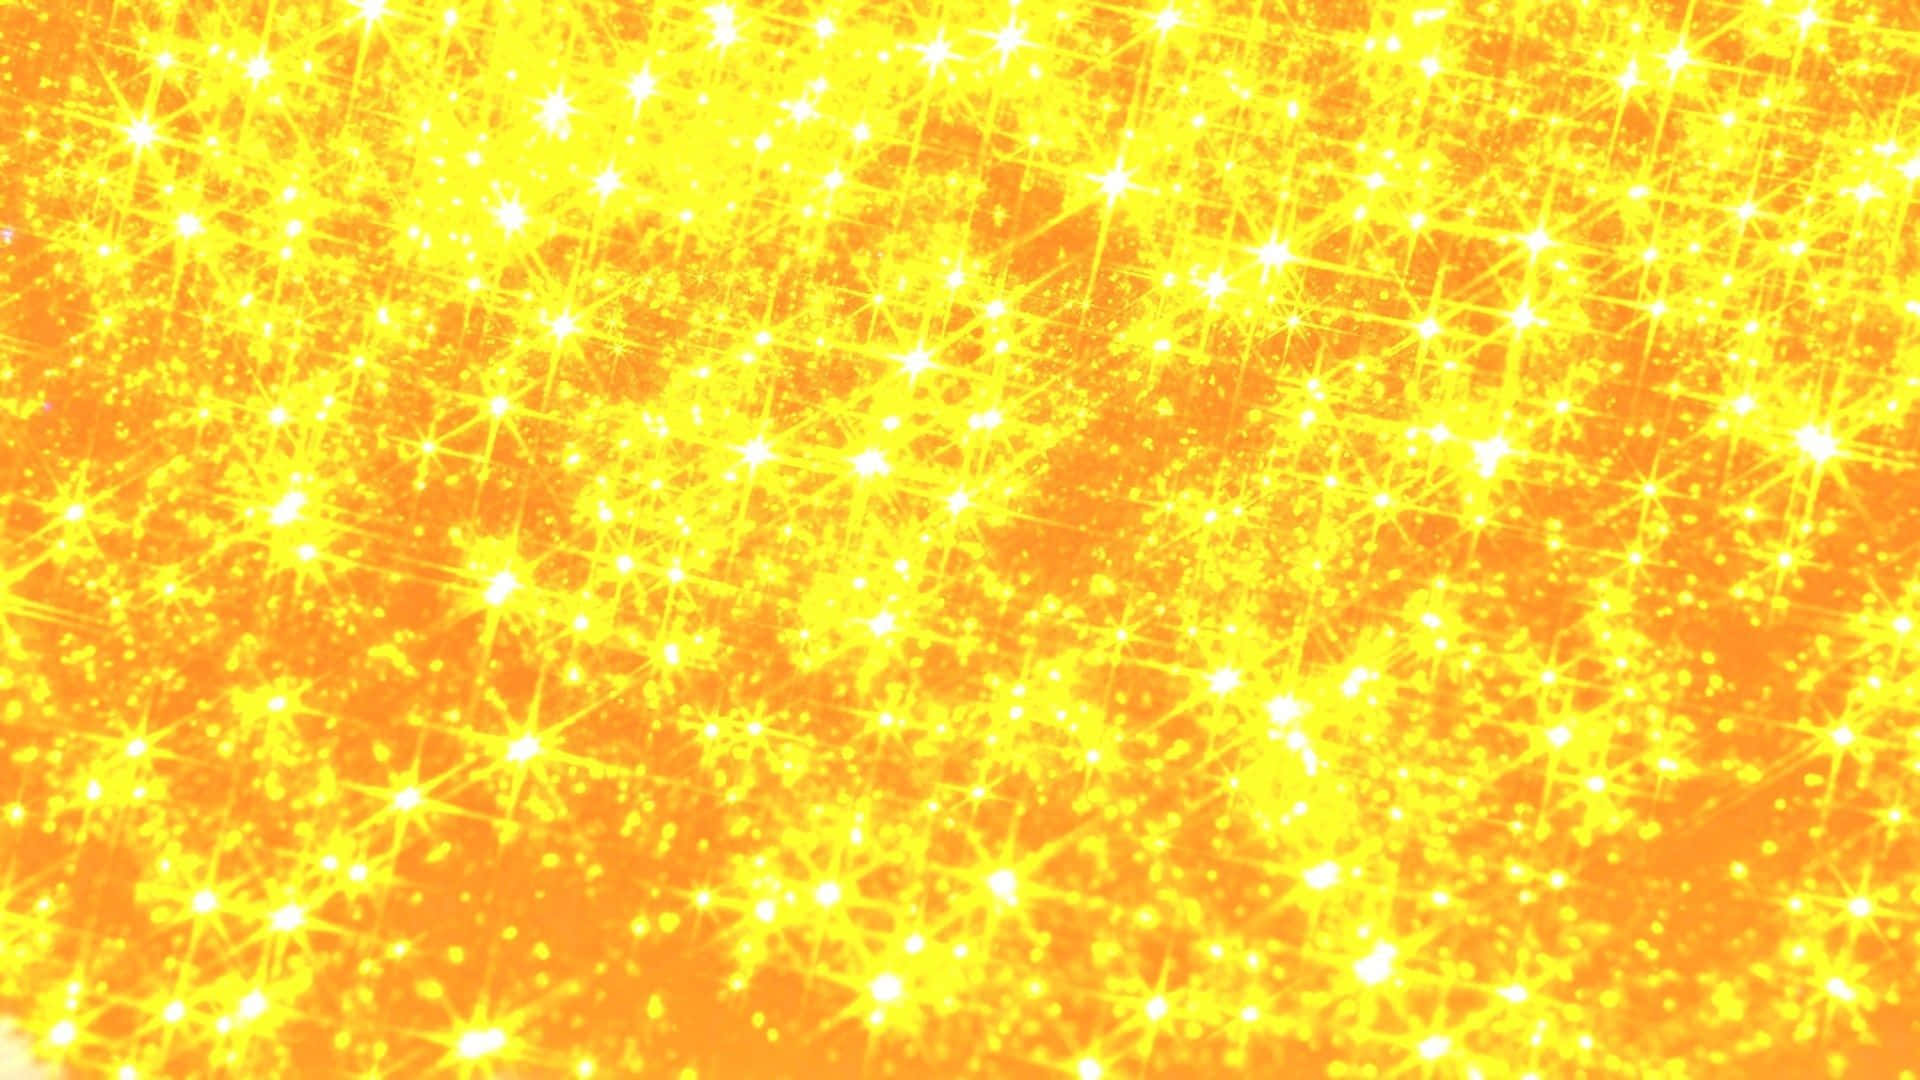 Shine brightly with this bold yellow glitter background